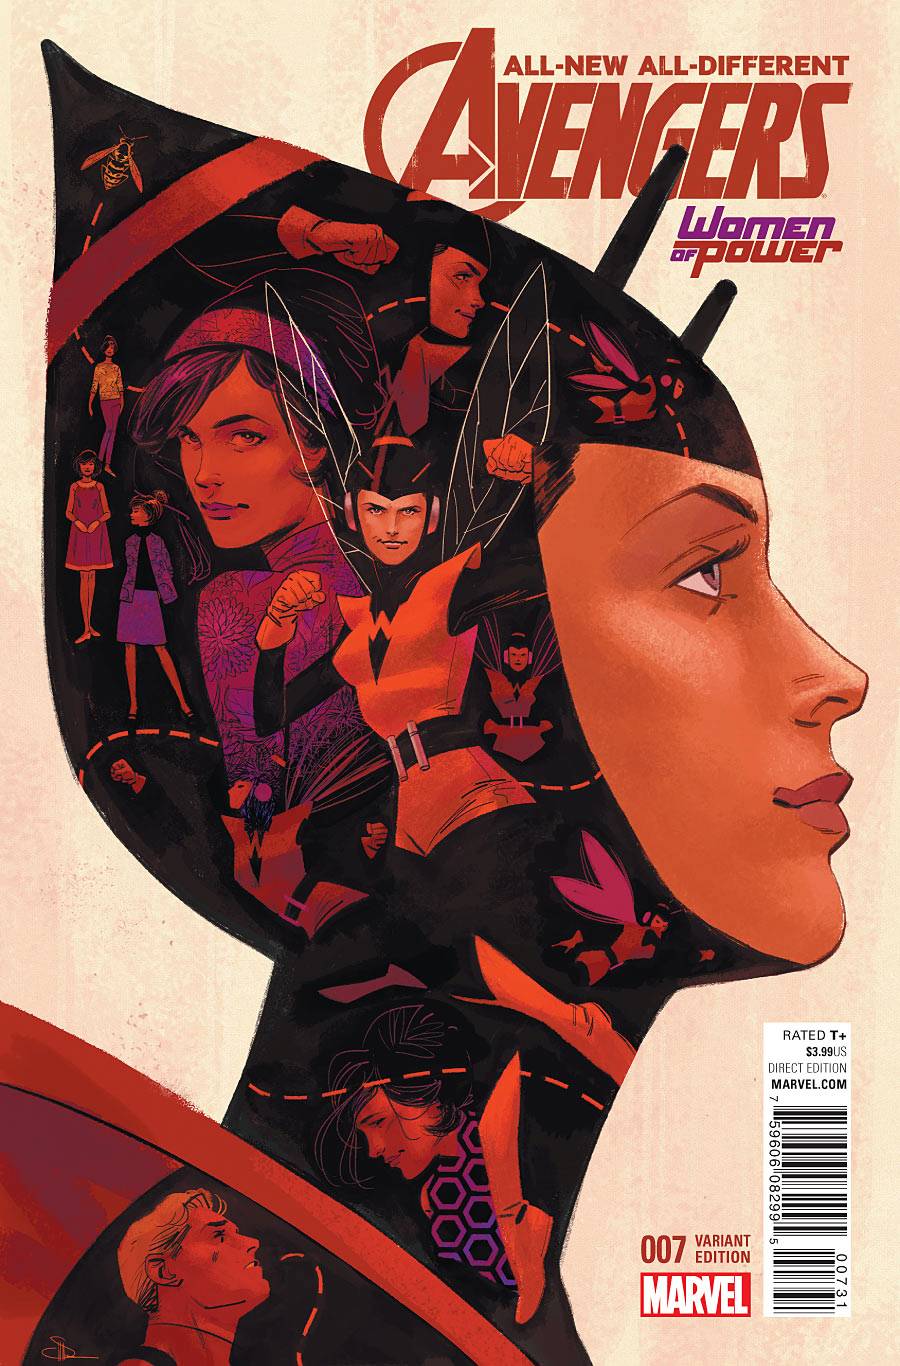 All New All Different Avengers #7 (Artist Wop Variant) (2015)